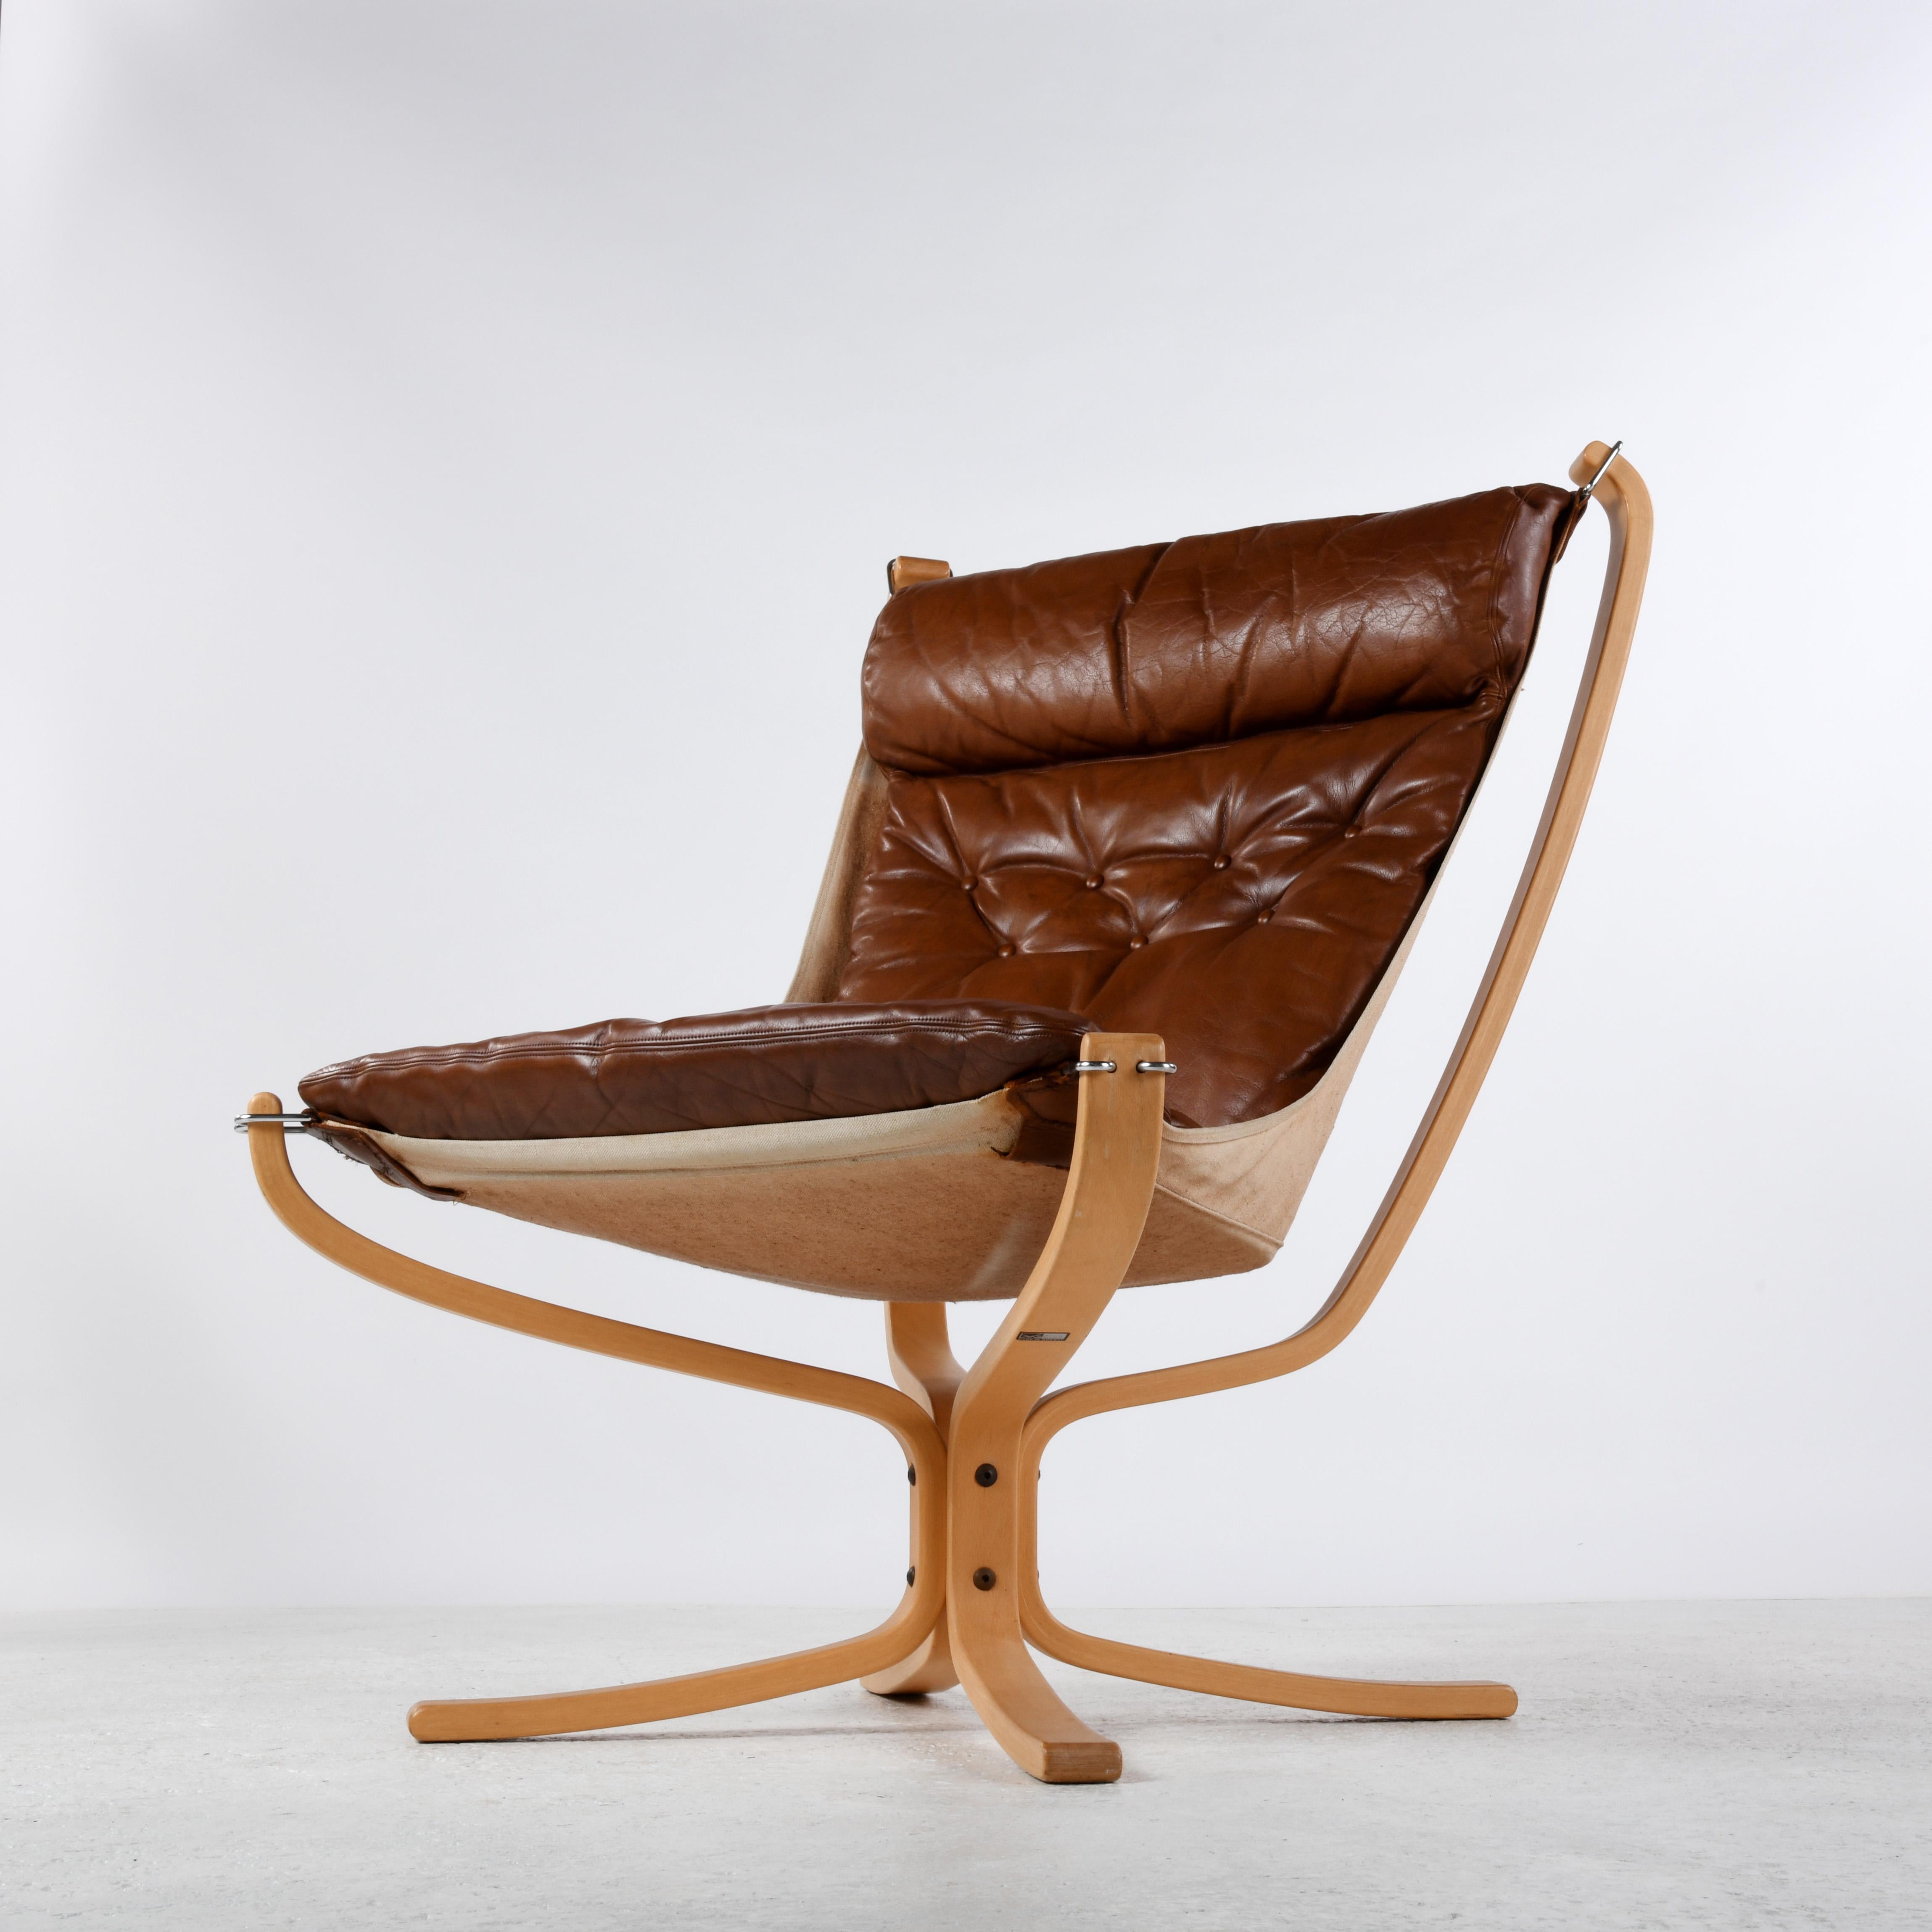 Late 19th Century Falcon chair, design Sigurd Ressell, wood and brown leather version